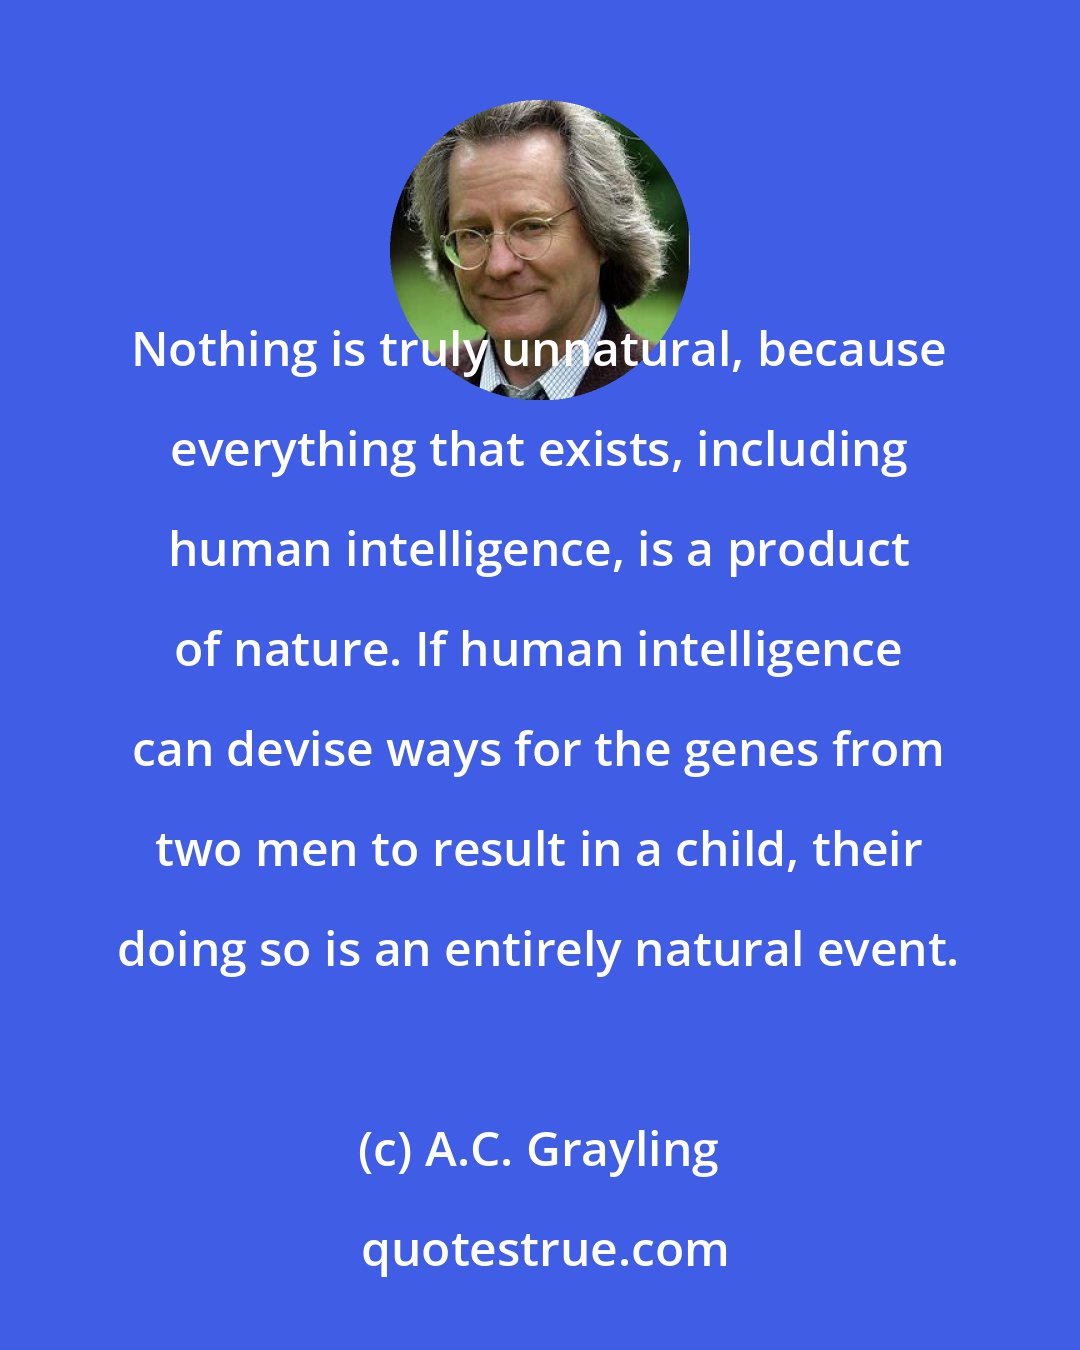 A.C. Grayling: Nothing is truly unnatural, because everything that exists, including human intelligence, is a product of nature. If human intelligence can devise ways for the genes from two men to result in a child, their doing so is an entirely natural event.